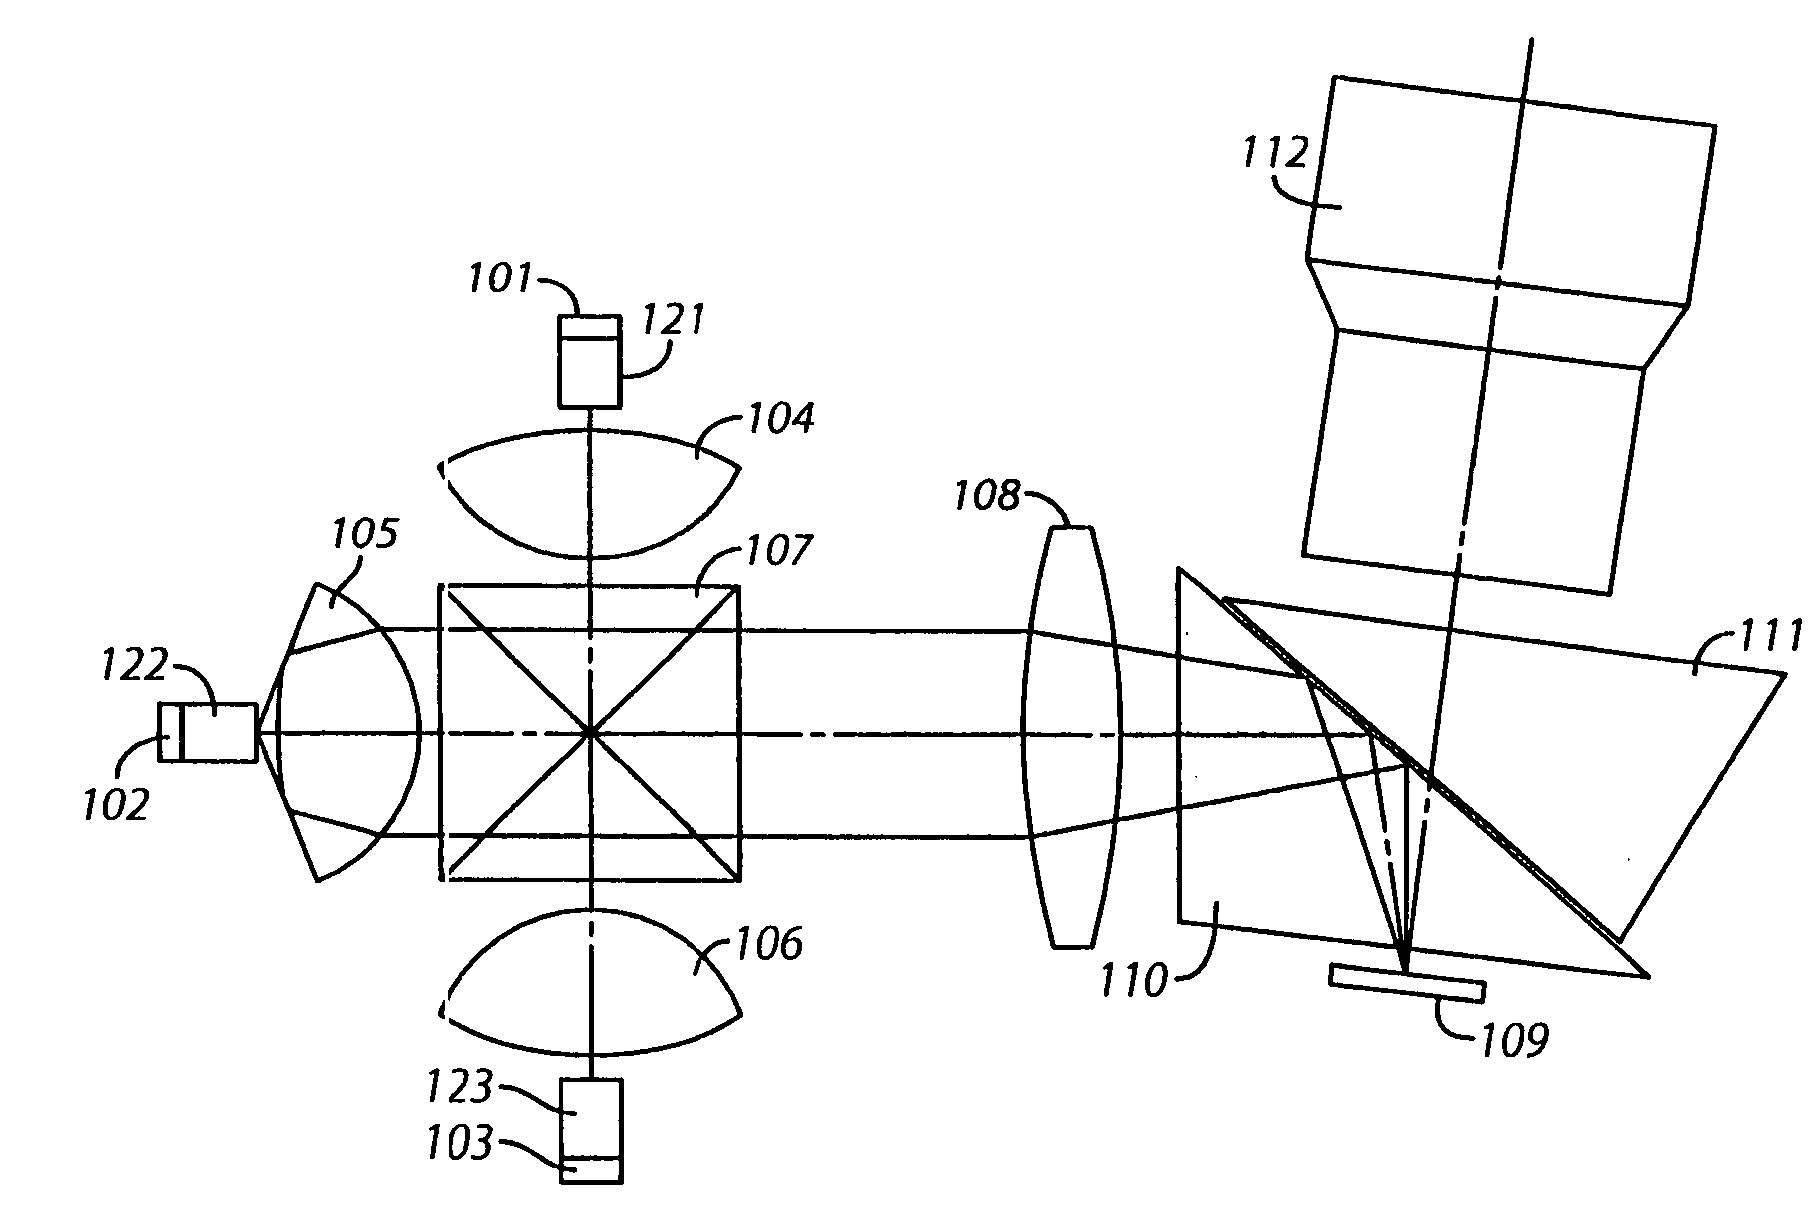 High efficiency LED optical engine for a digital light processing (DLP) projector and method of forming same